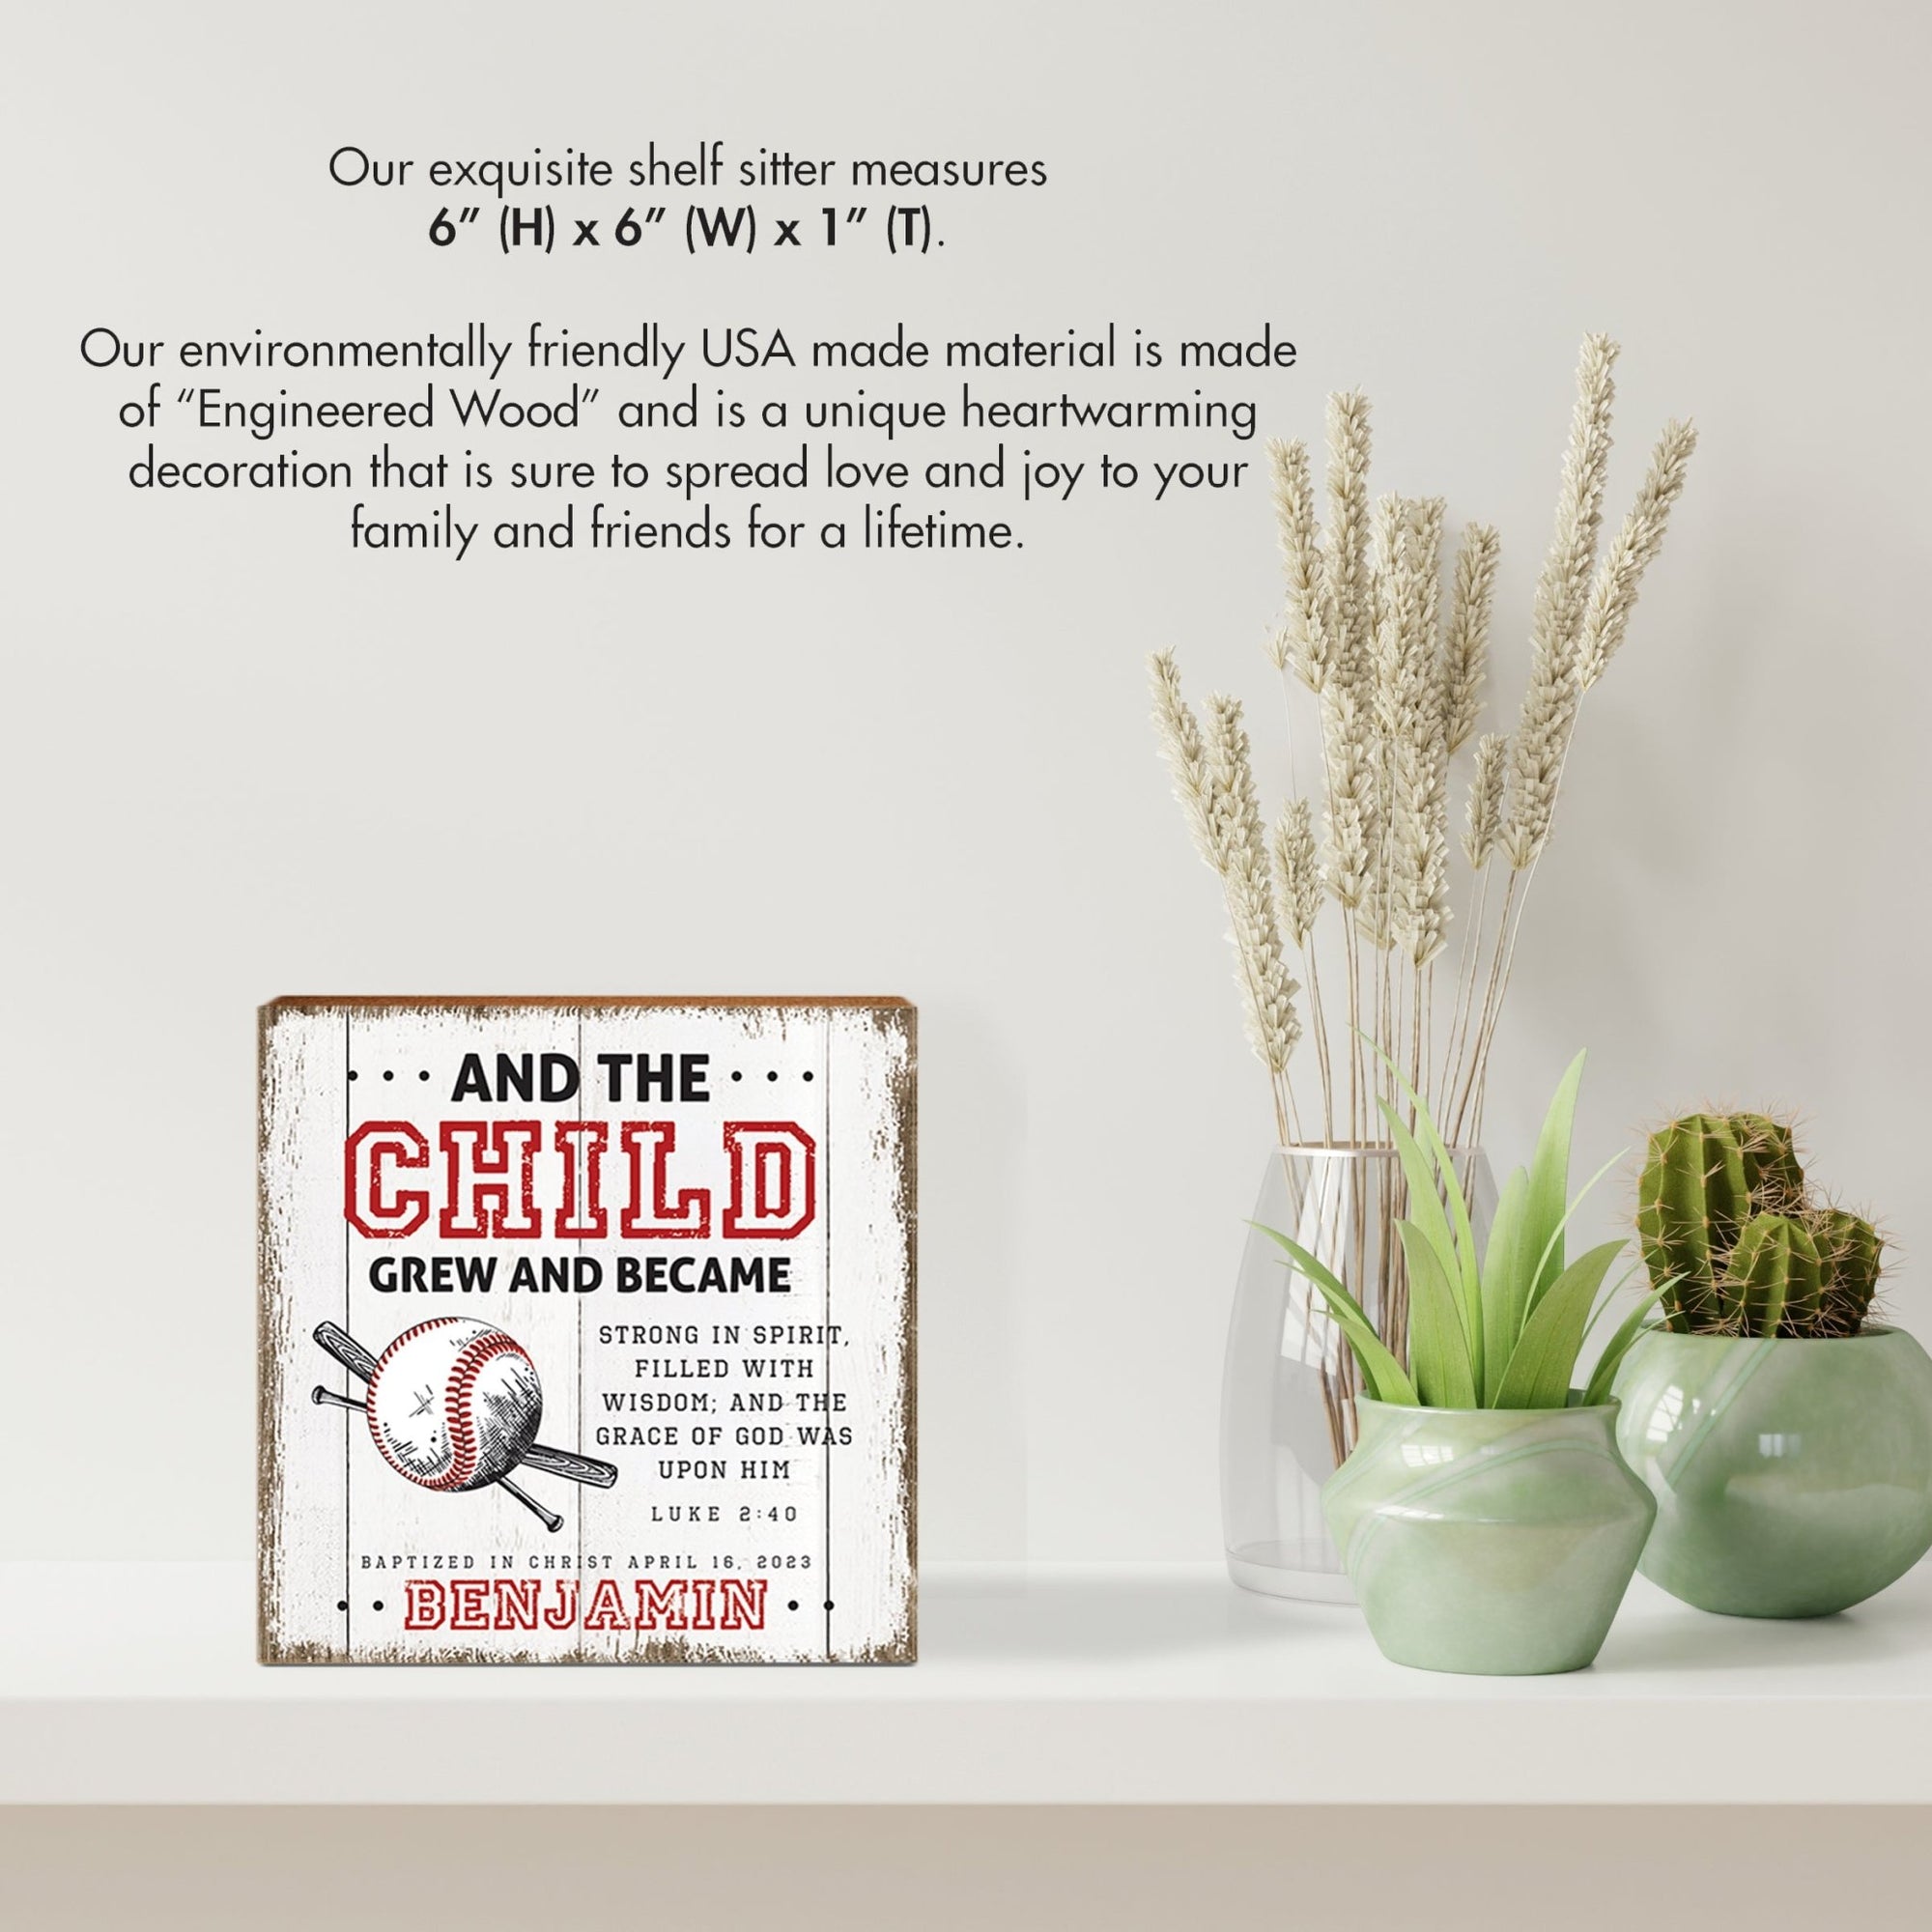 Personalized Rustic Wooden Baseball Shadow Box Shelf Décor With Inspiring Bible Verses - And The Child - LifeSong Milestones